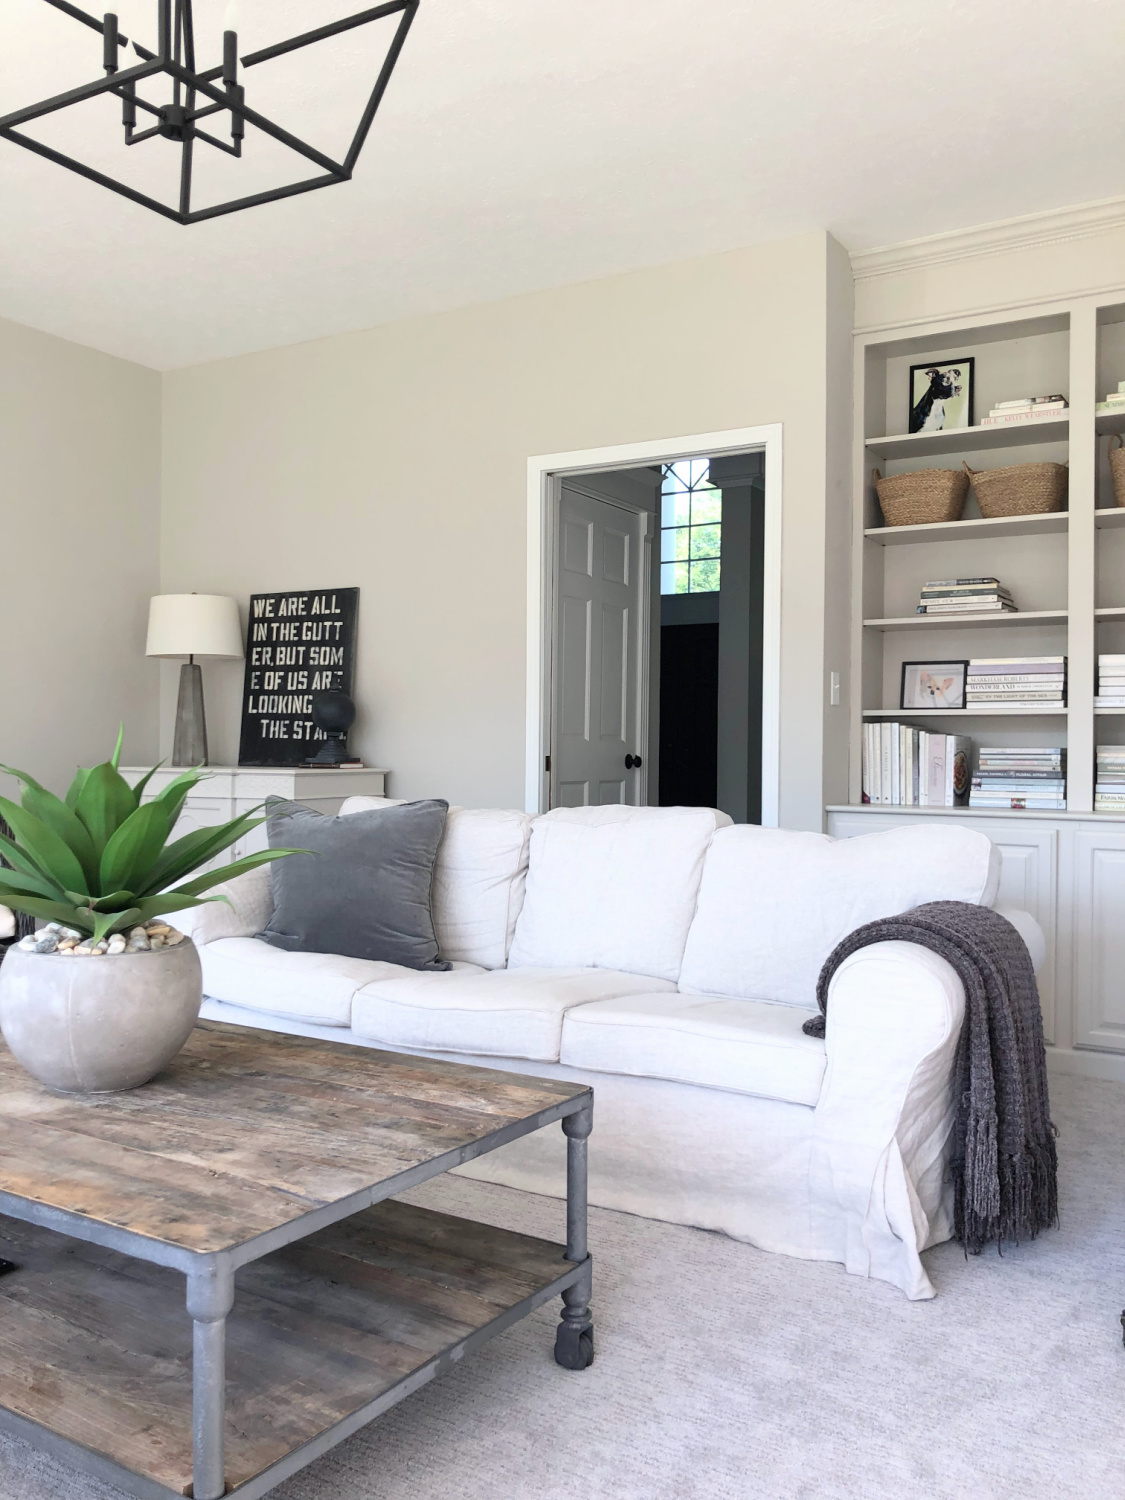 SW Agreeable Gray in tonal family room with built-ins and Belgian linen - Hello Lovely Studio. #swagreeablegray